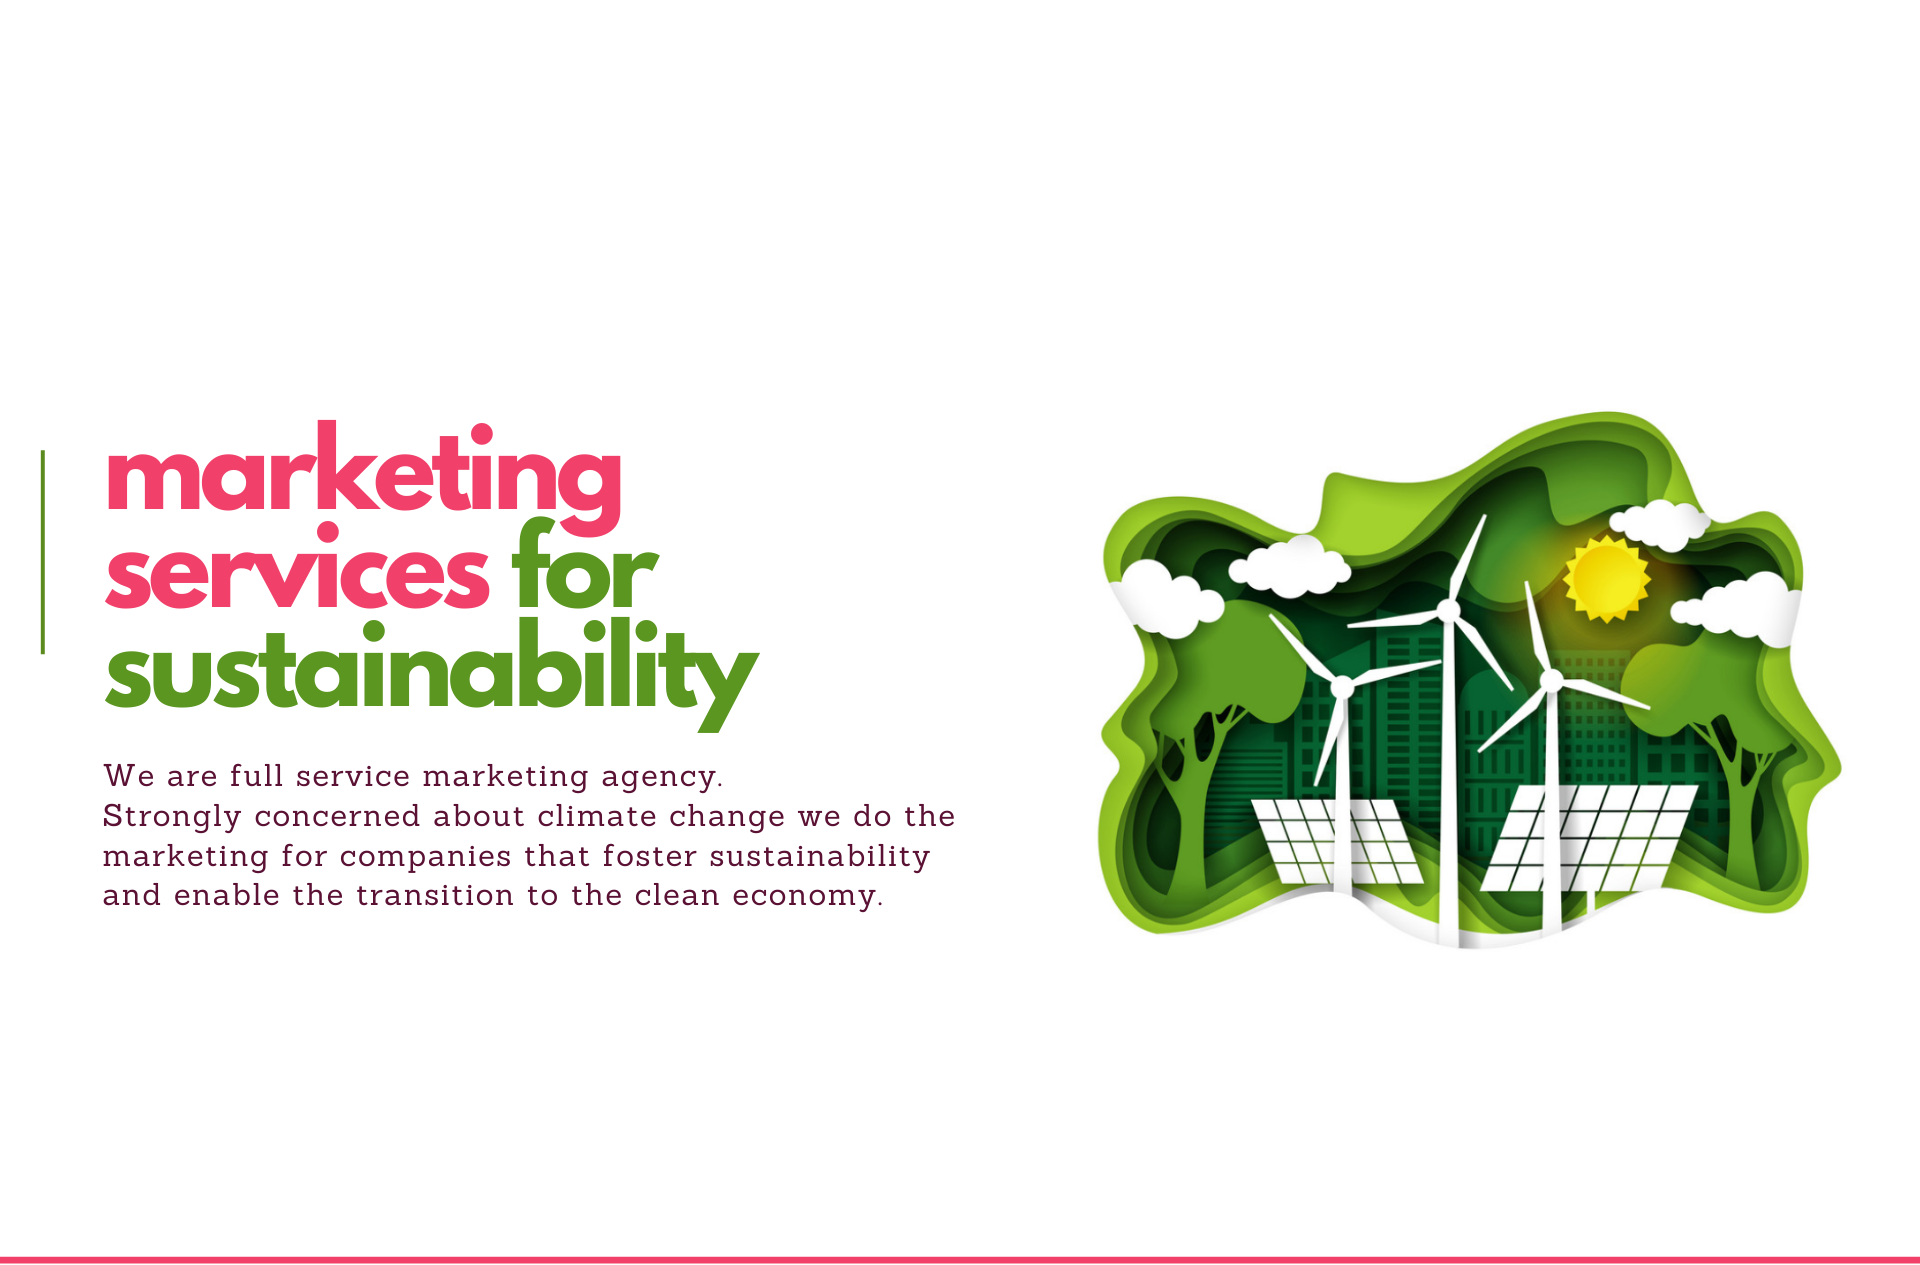 We are full service marketing agency. Strongly concerned about climate change we do the marketing for companies that foster sustainability and enable the transition to the clean economy.(1)